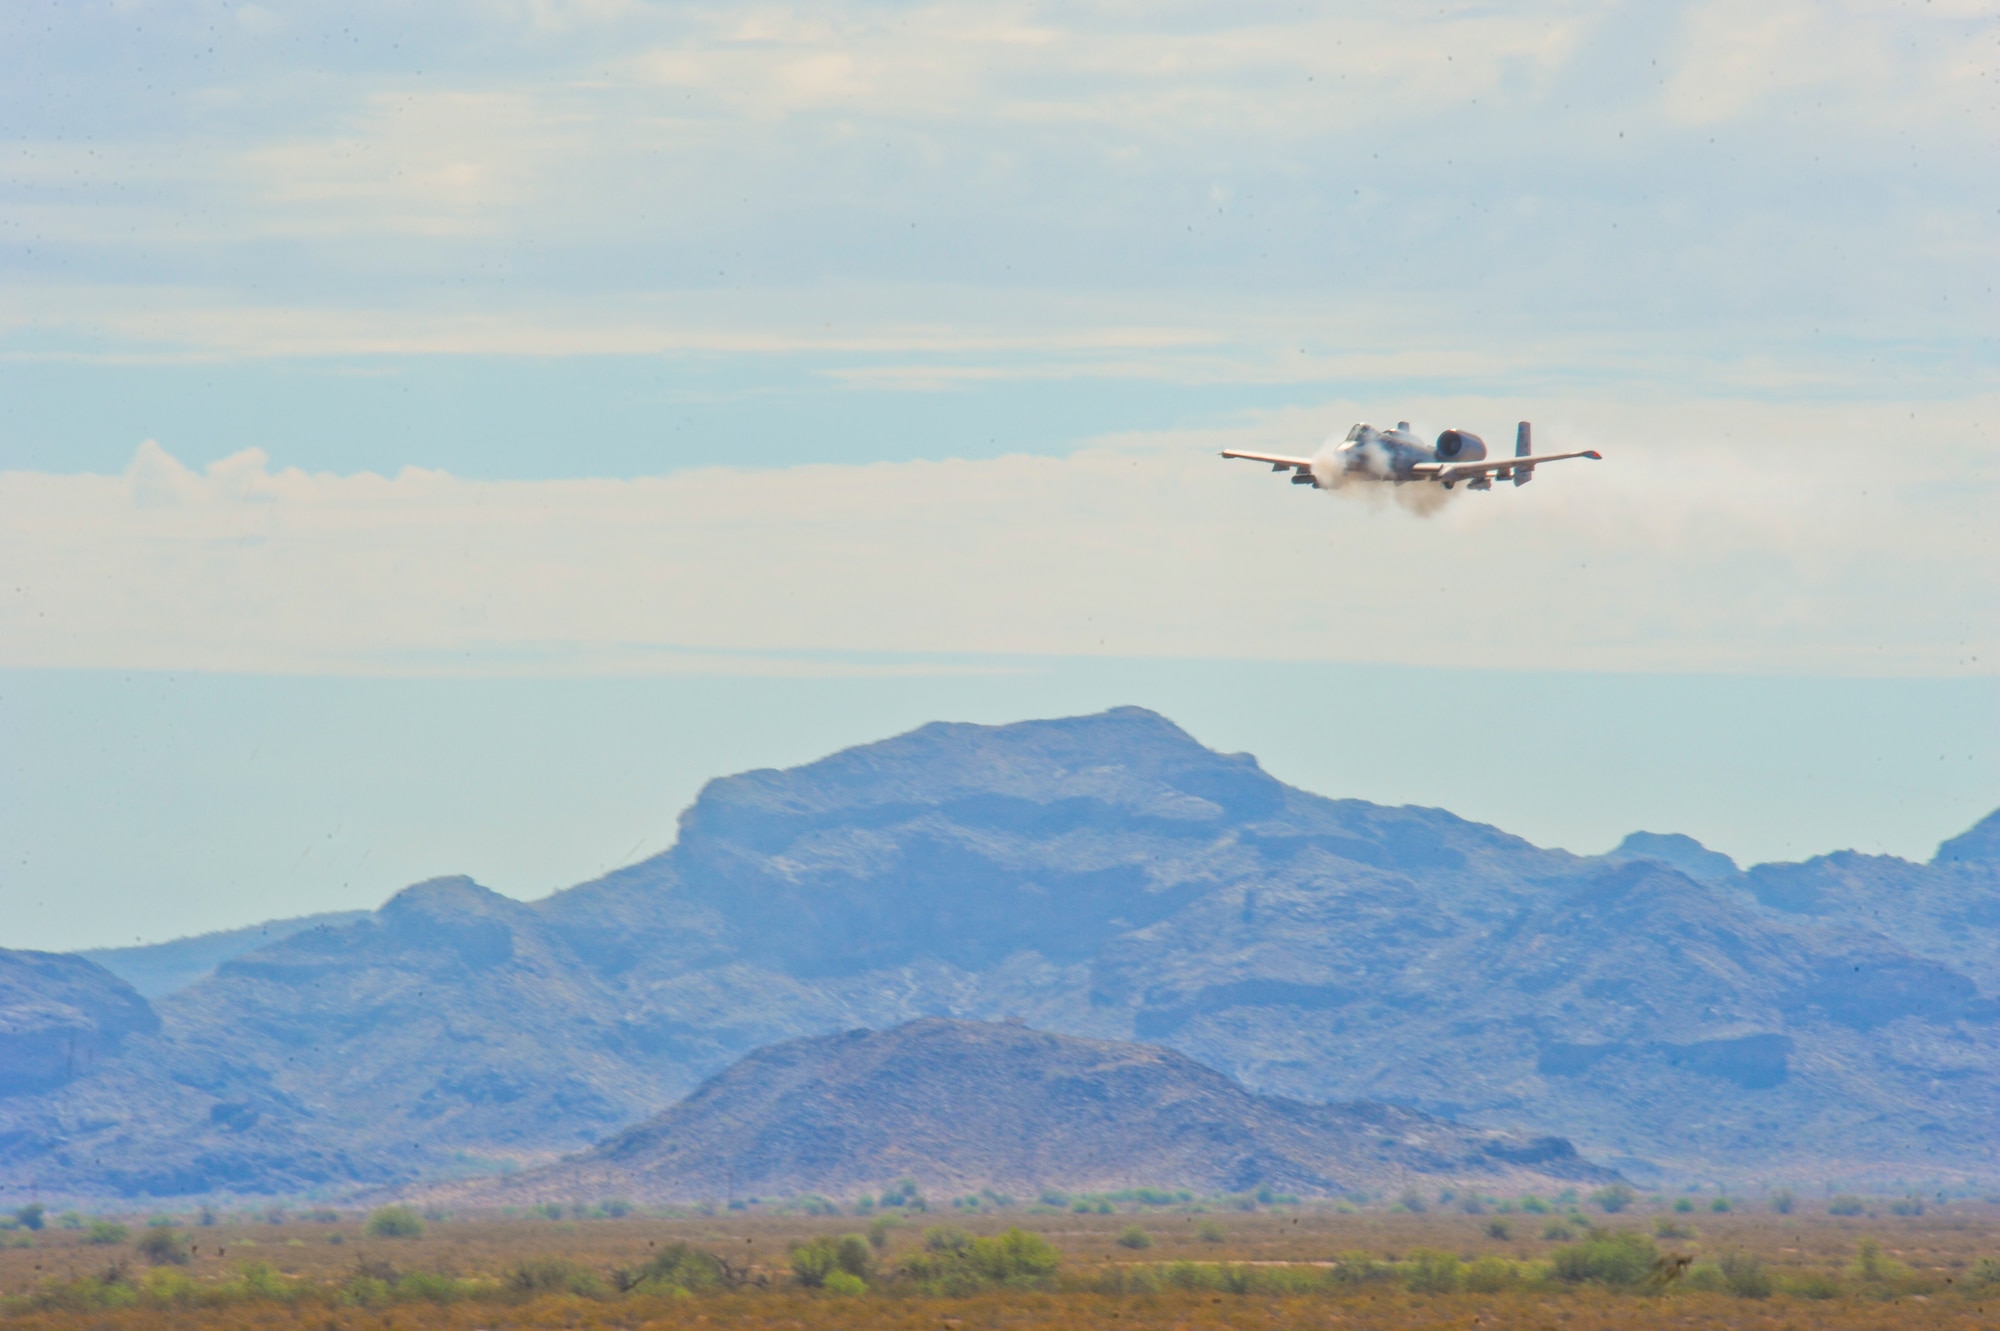 An A-10 Thunderbolt II strafes during the 2014 Hawgsmoke competition July 10, 2014, at the Barry M. Goldwater Range II in Tucson, Ariz. The 2014 Hawgsmoke competition focused on forward firing. The participants competed in high, medium, and low-angle strafes. (U.S. Air Force photo/Airman 1st Class Sivan Veazie)